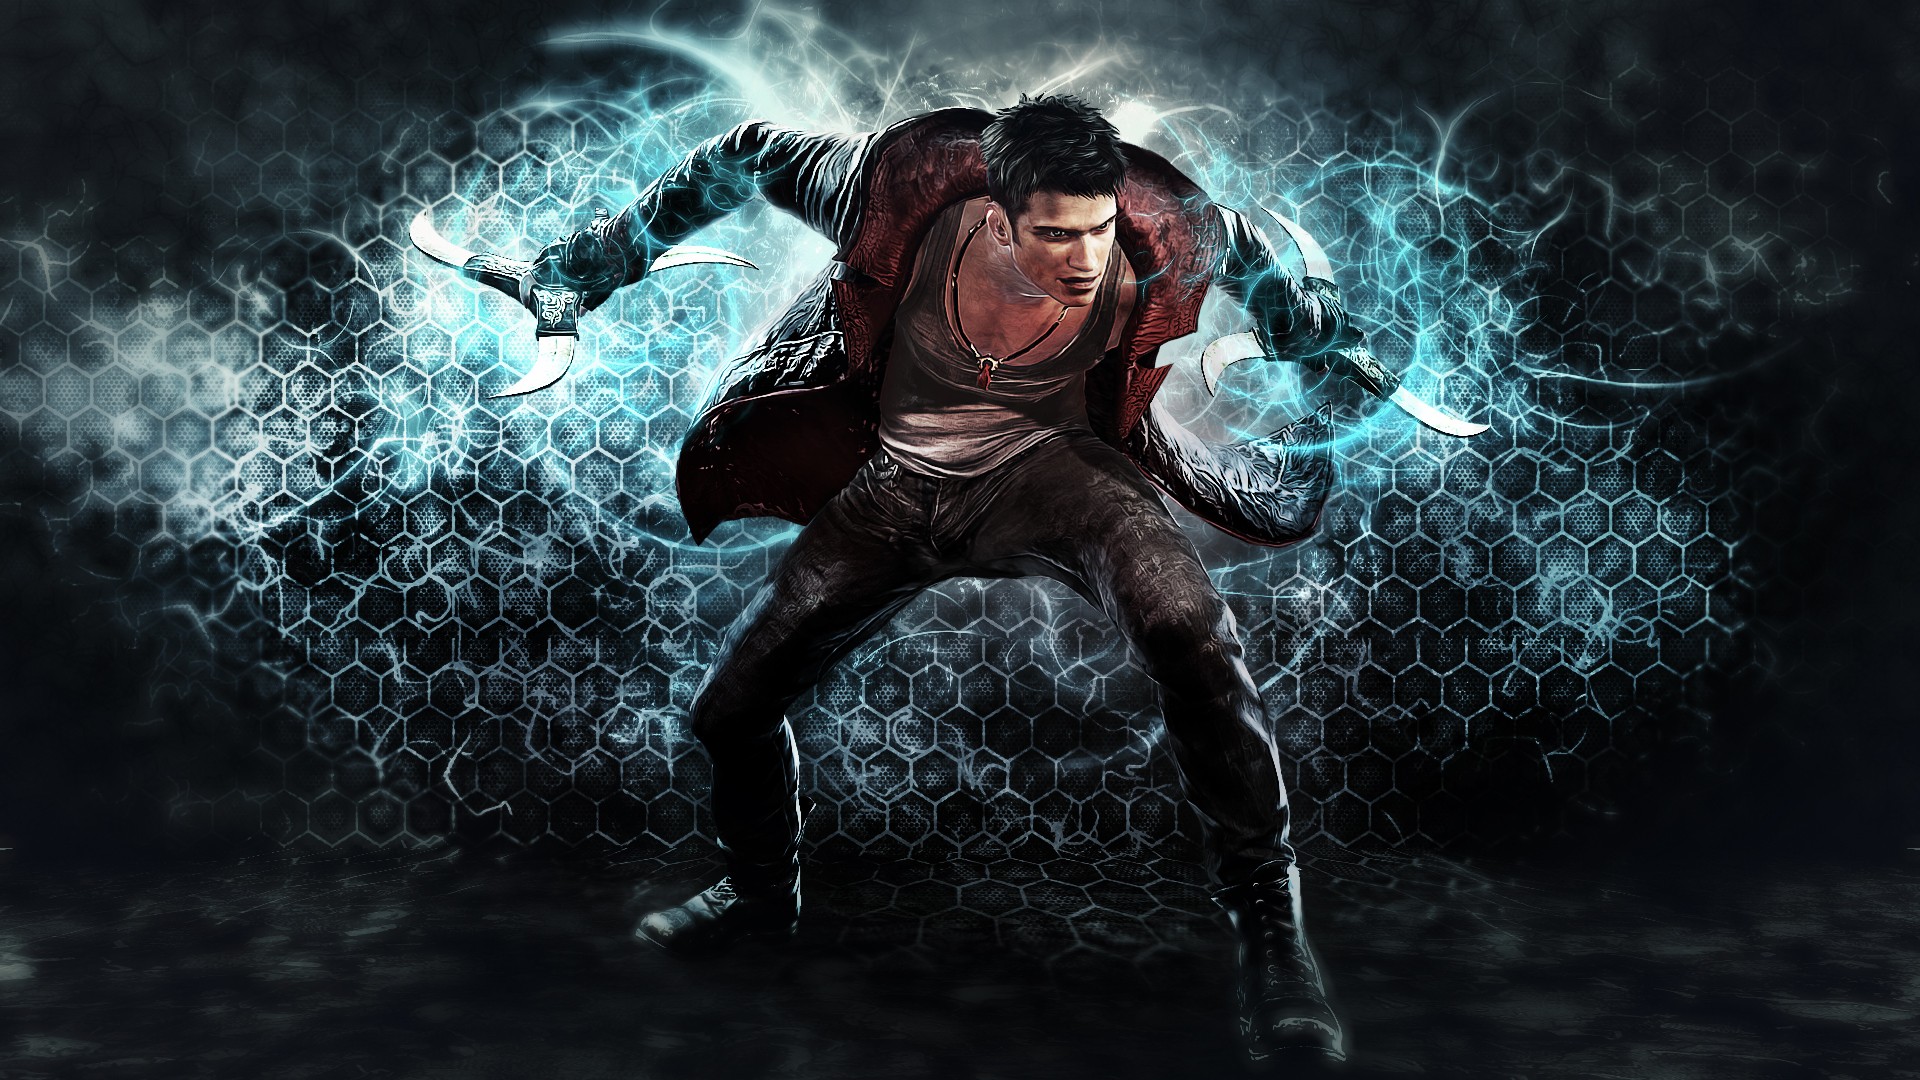 Video Game DmC: Devil May Cry HD Wallpaper by SyanArt